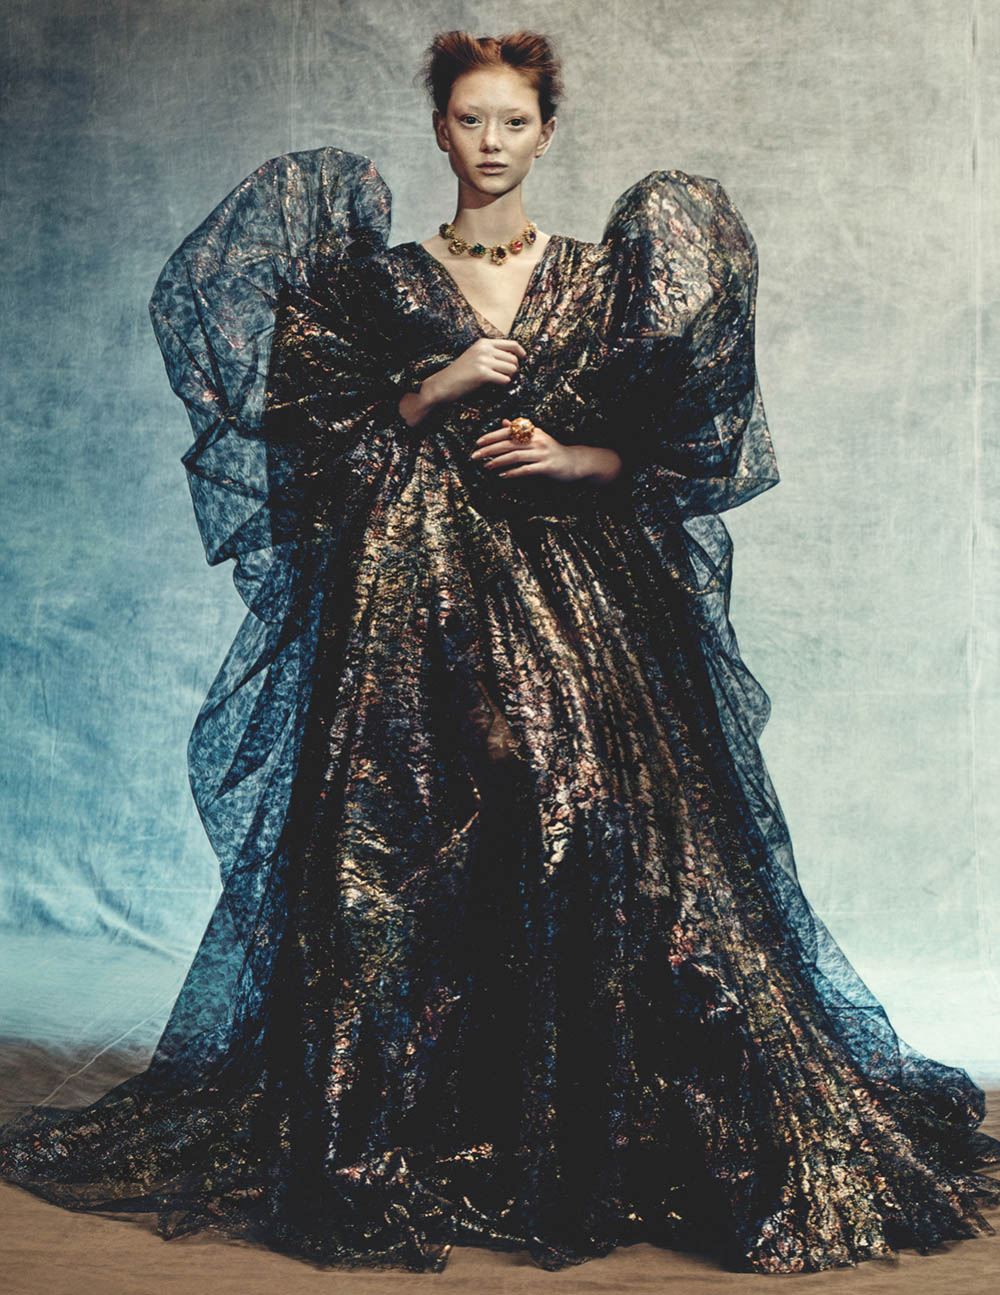 ''High Drama'' by Paolo Roversi for British Vogue April 2020